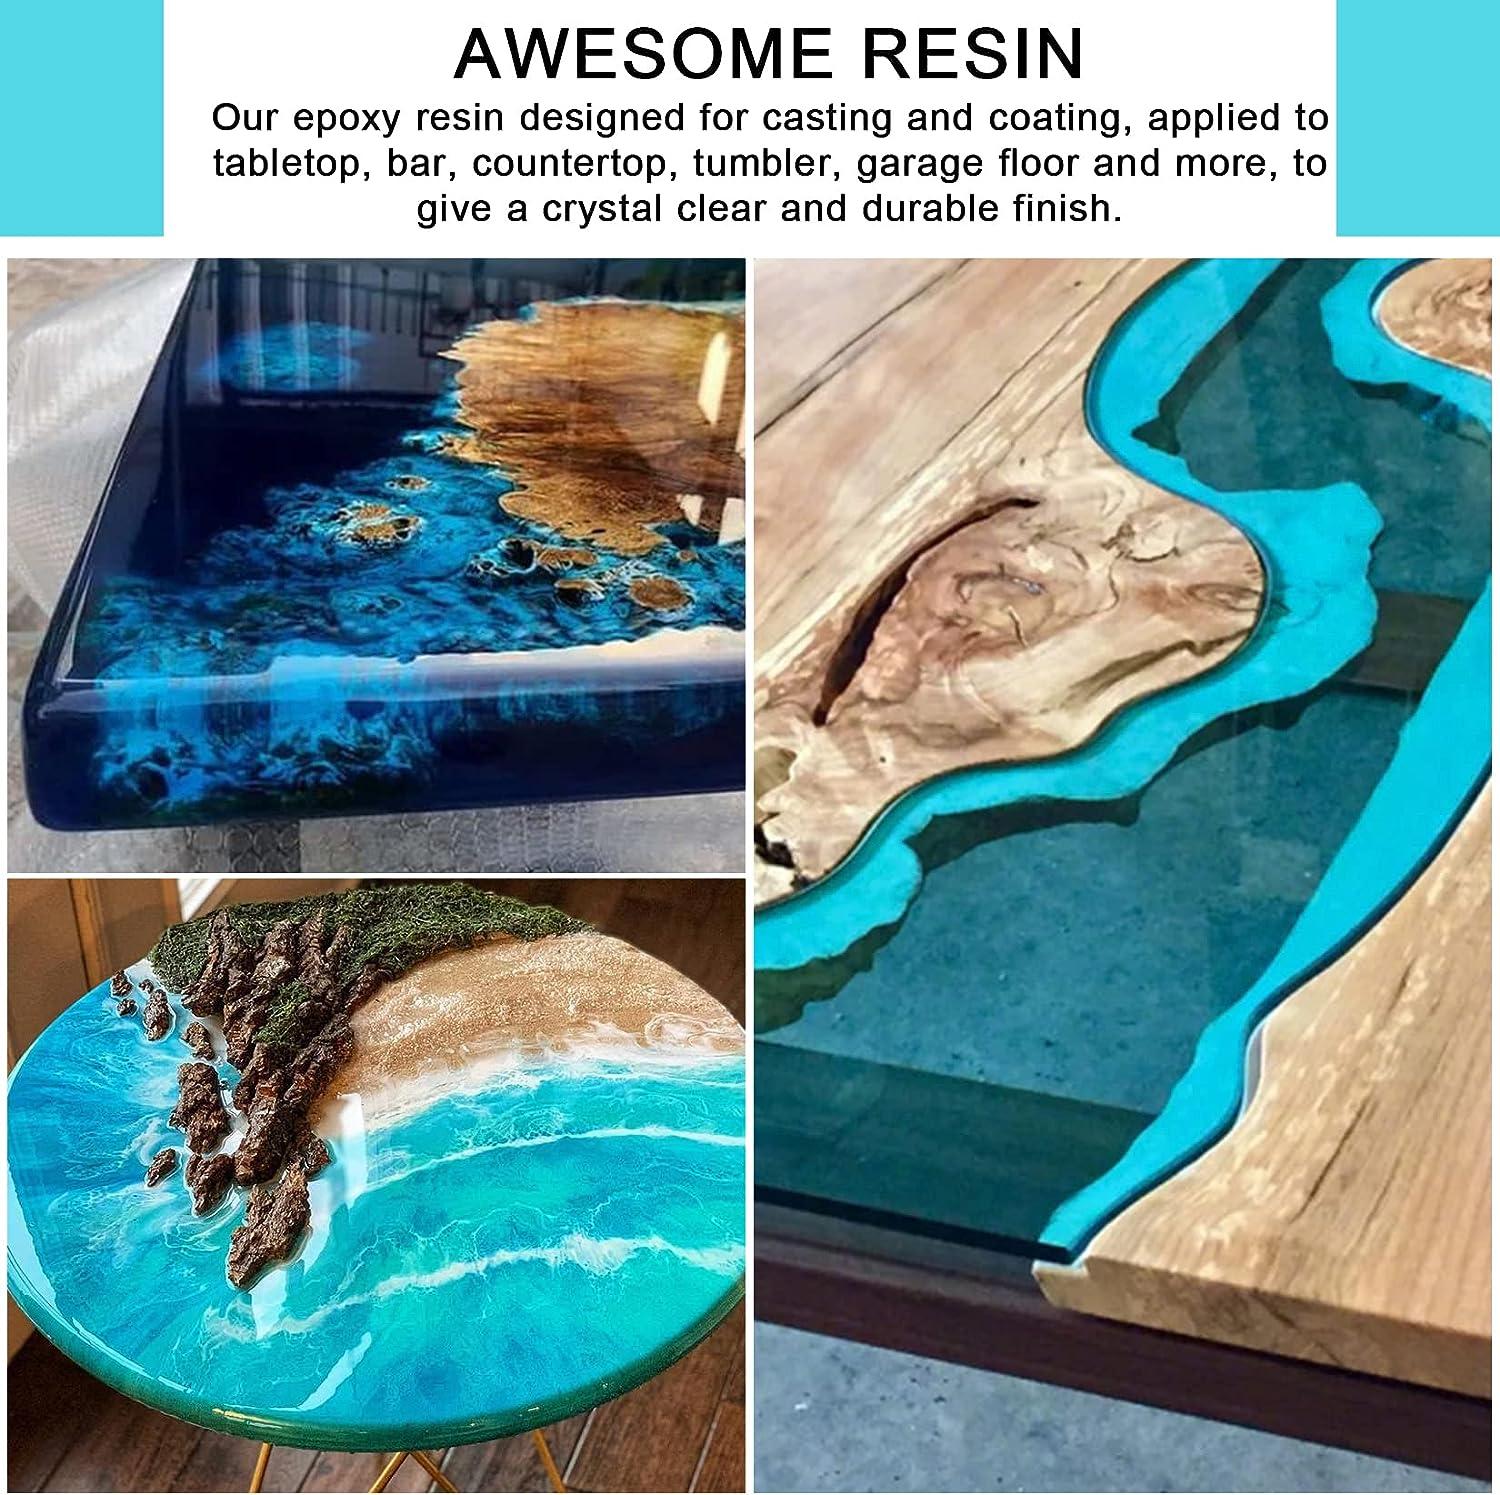 Table Top Epoxy Resin 2 Gallon Kit - Crystal Clear Coating and Casting  Resin for